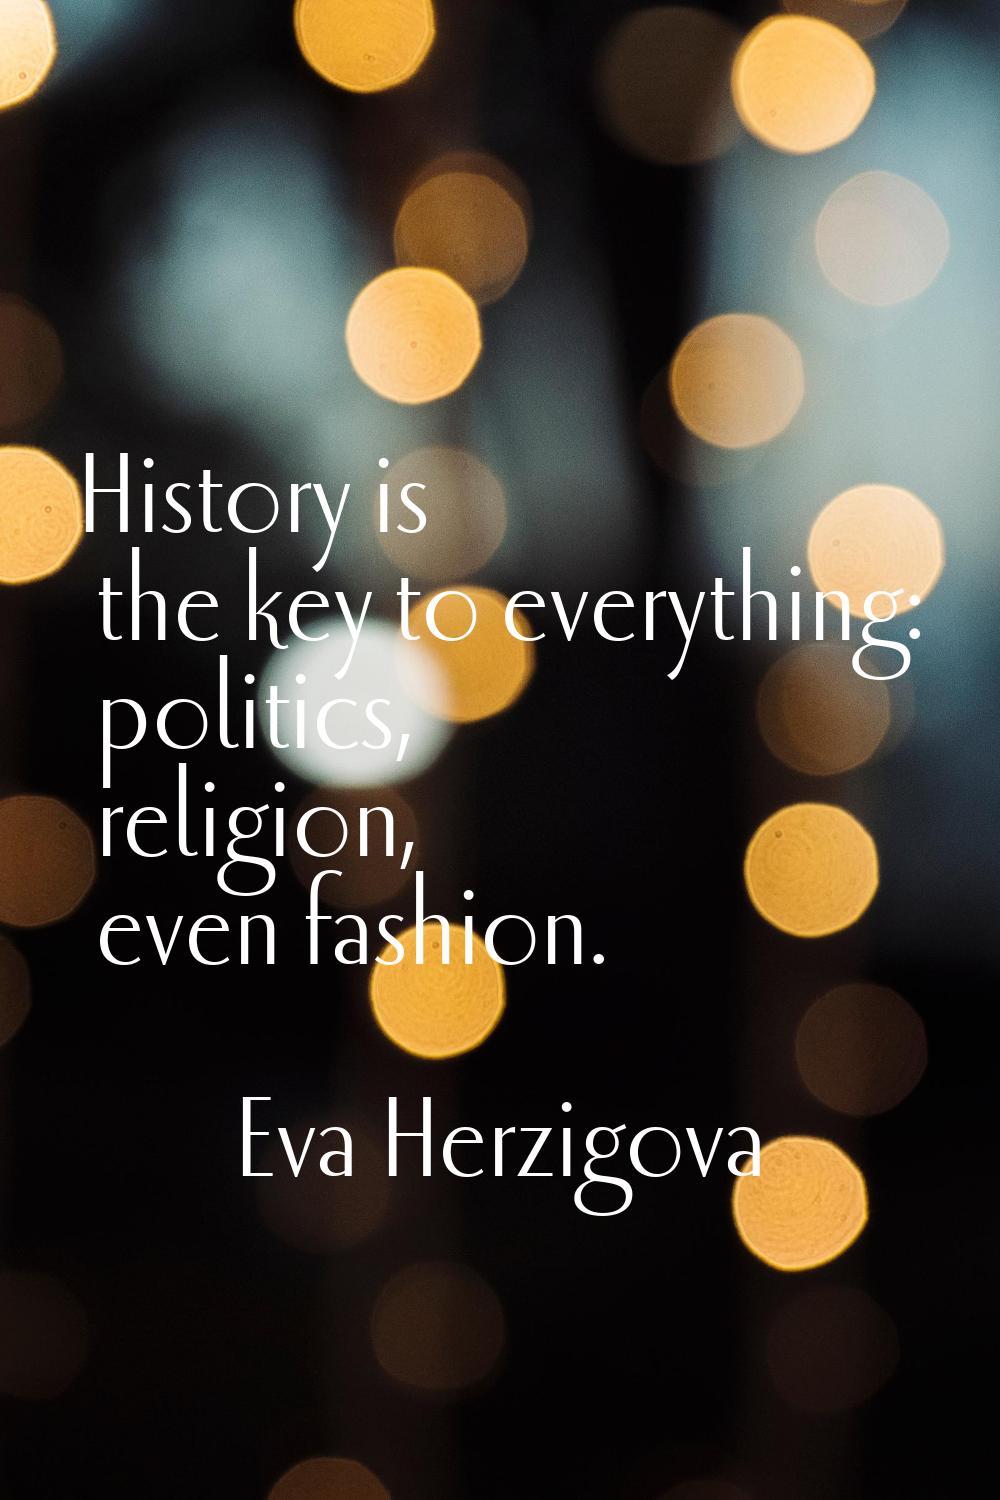 History is the key to everything: politics, religion, even fashion.